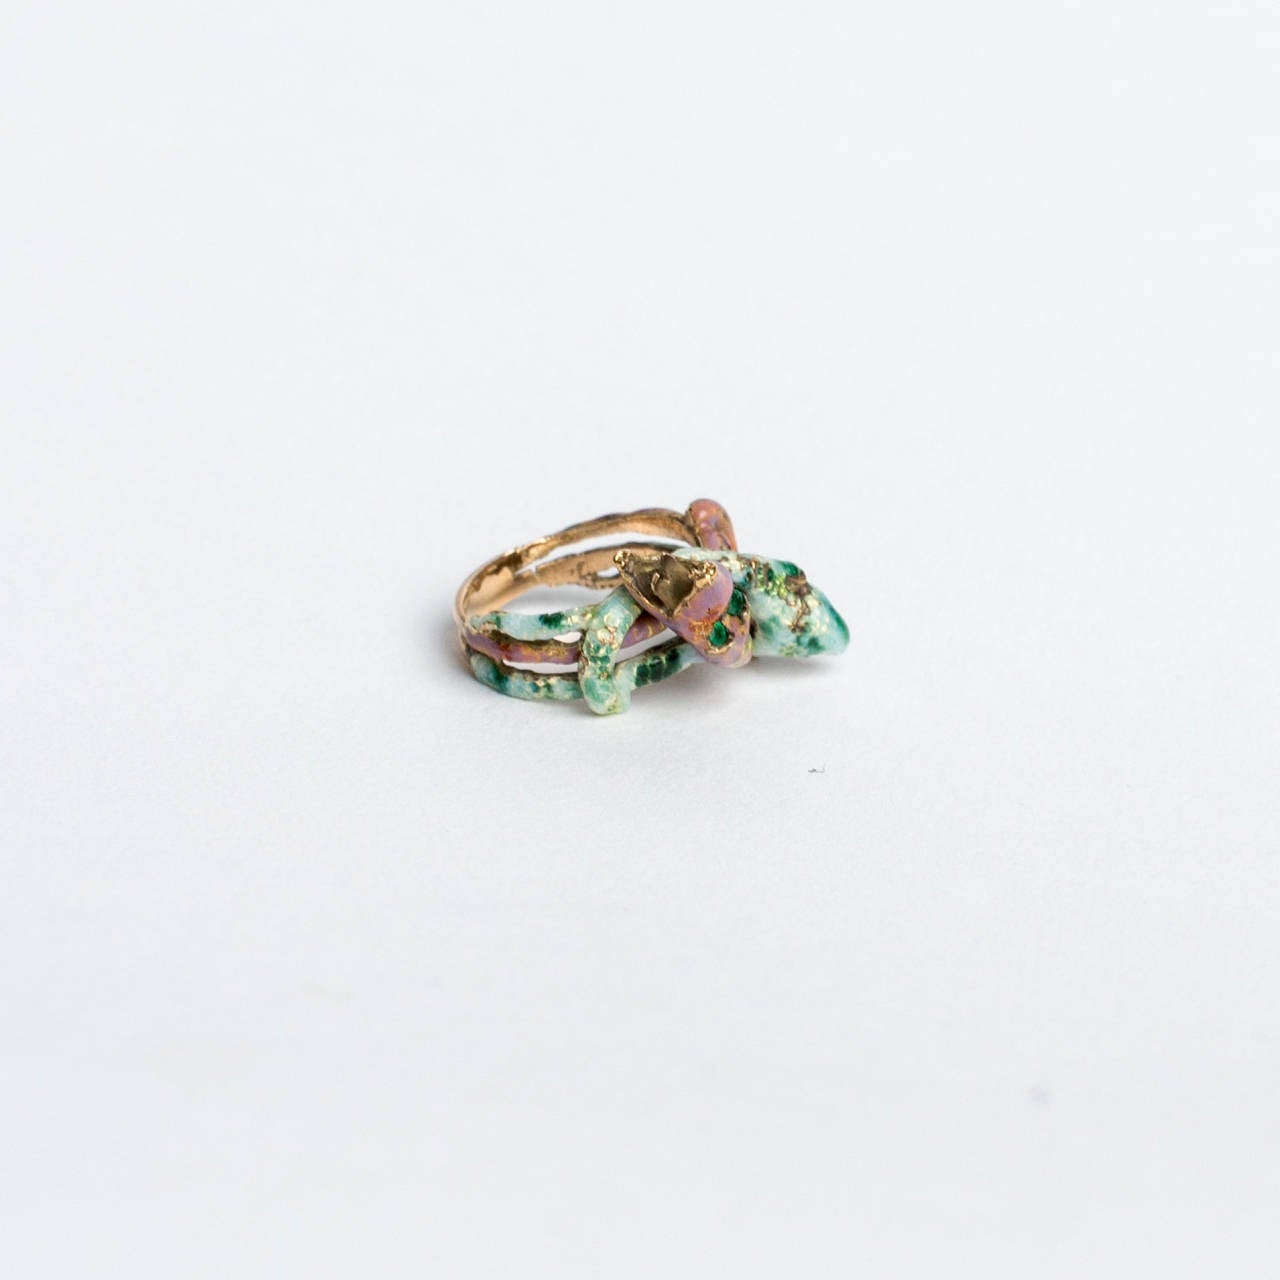 One of our most coveted treasures, appropriately found in Istanbul. This charming ring has such exquisite details-miniature gold tongues, emerald and ruby eyes...what a special find.

Size: 5